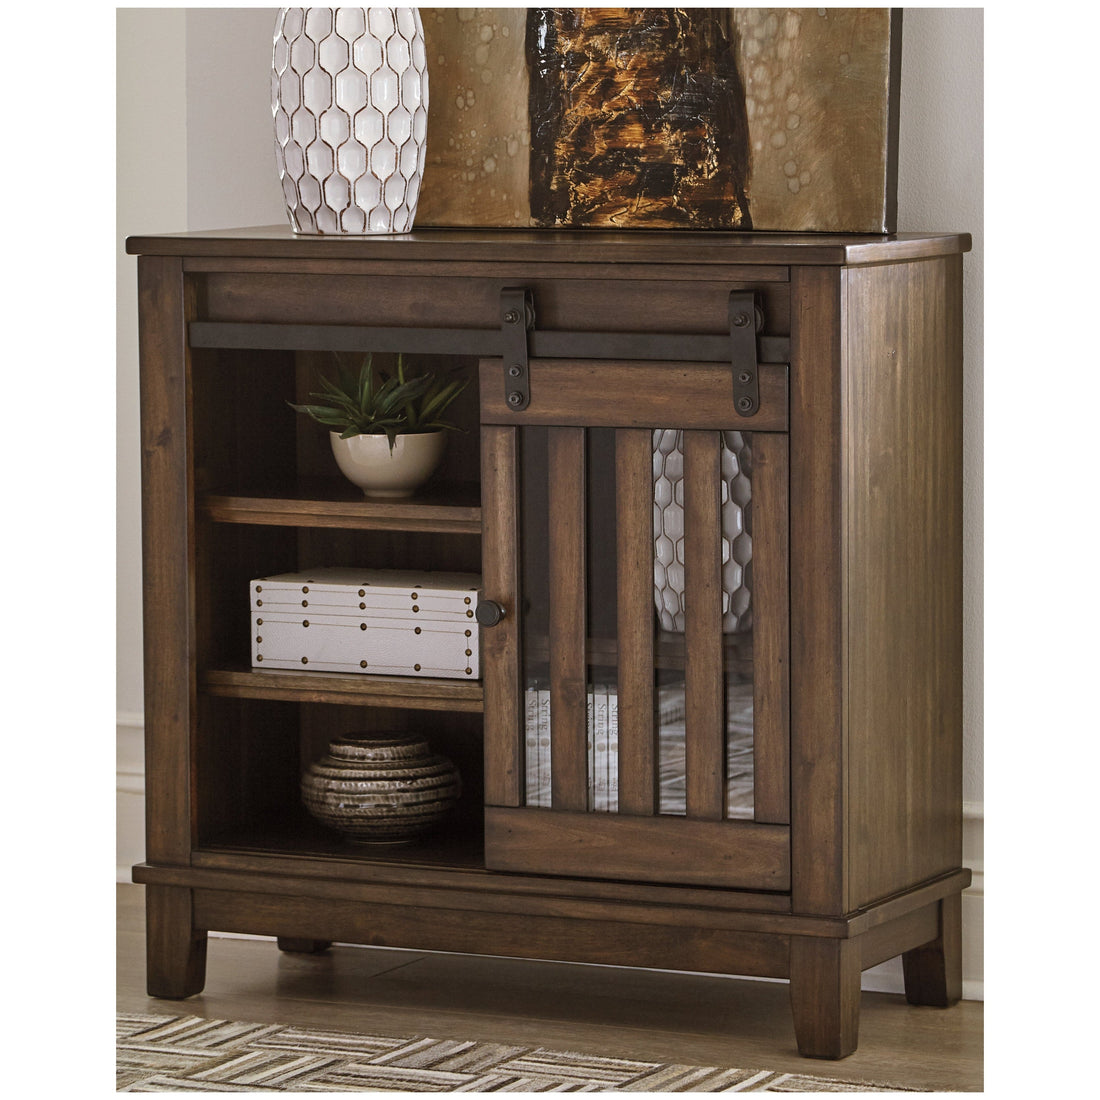 Brookport Accent Cabinet Ash-A4000130